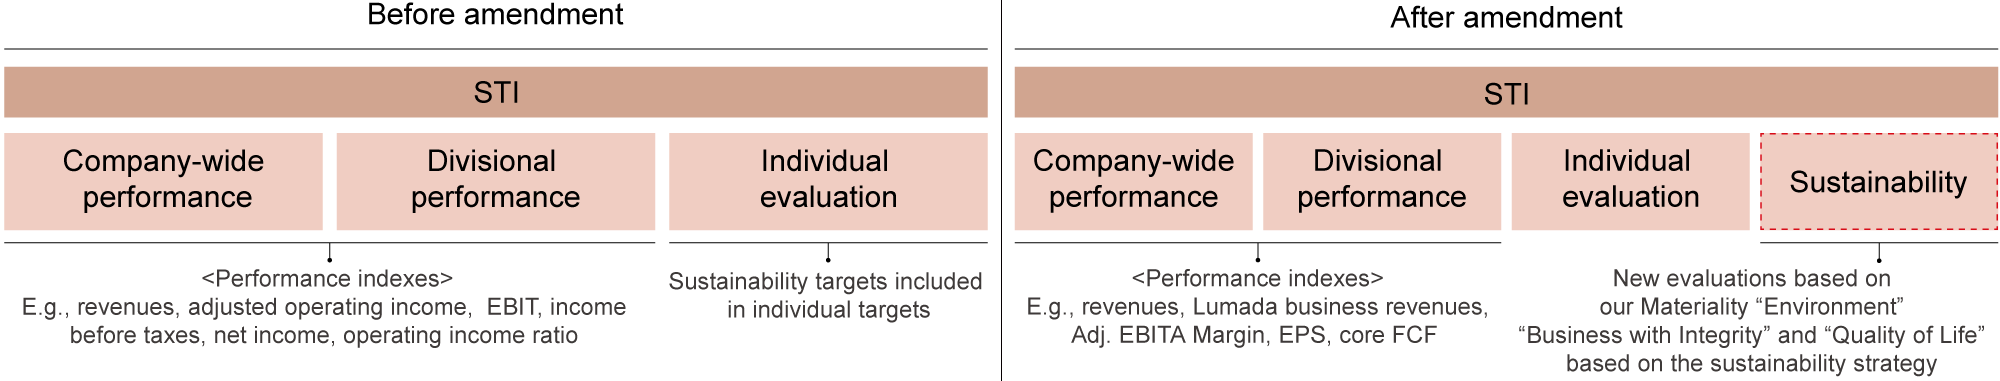 Reflecting Sustainability Targets in Executive Compensation Evaluation: Before amendment / After amendment